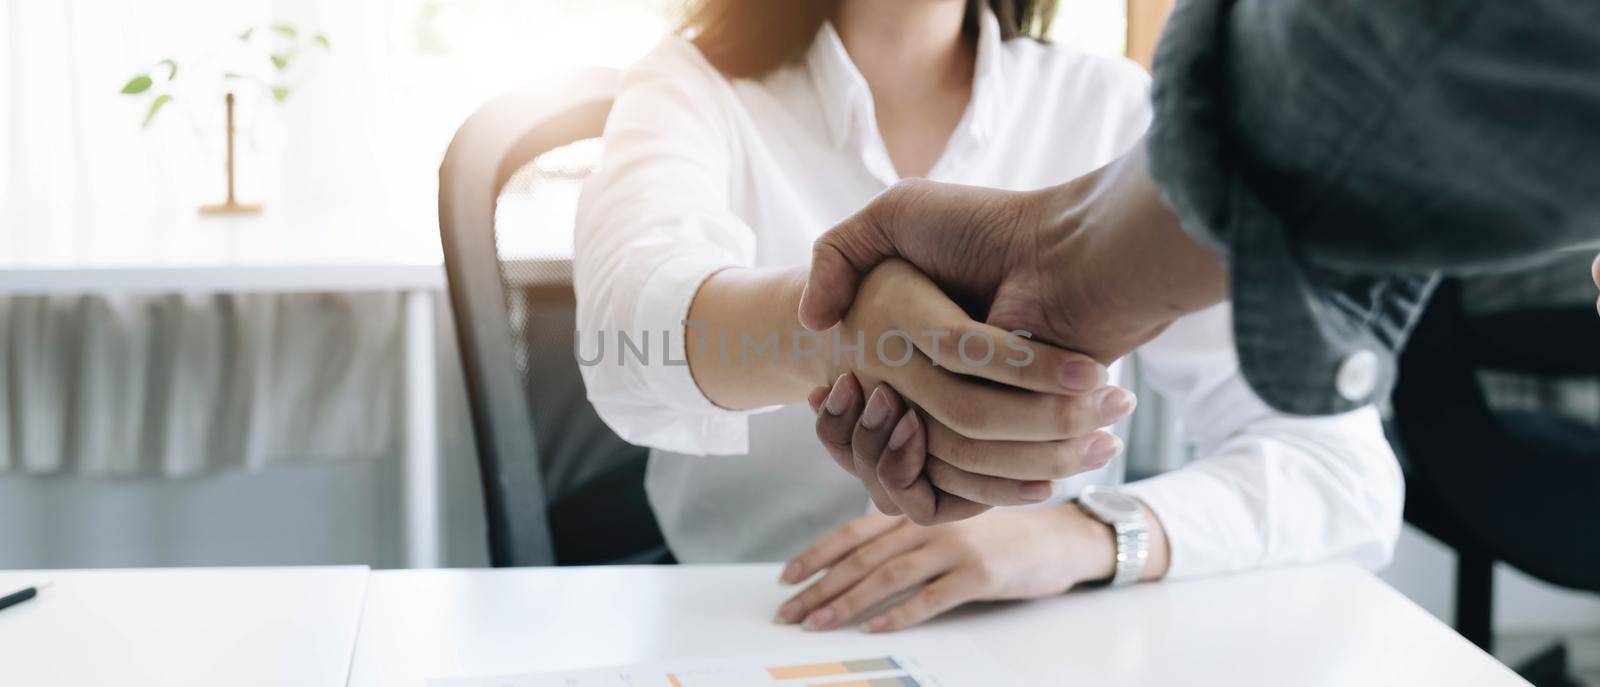 A close-up picture of a business shaking hands on a business cooperation agreement in the office. Concept of Cooperation business and success.